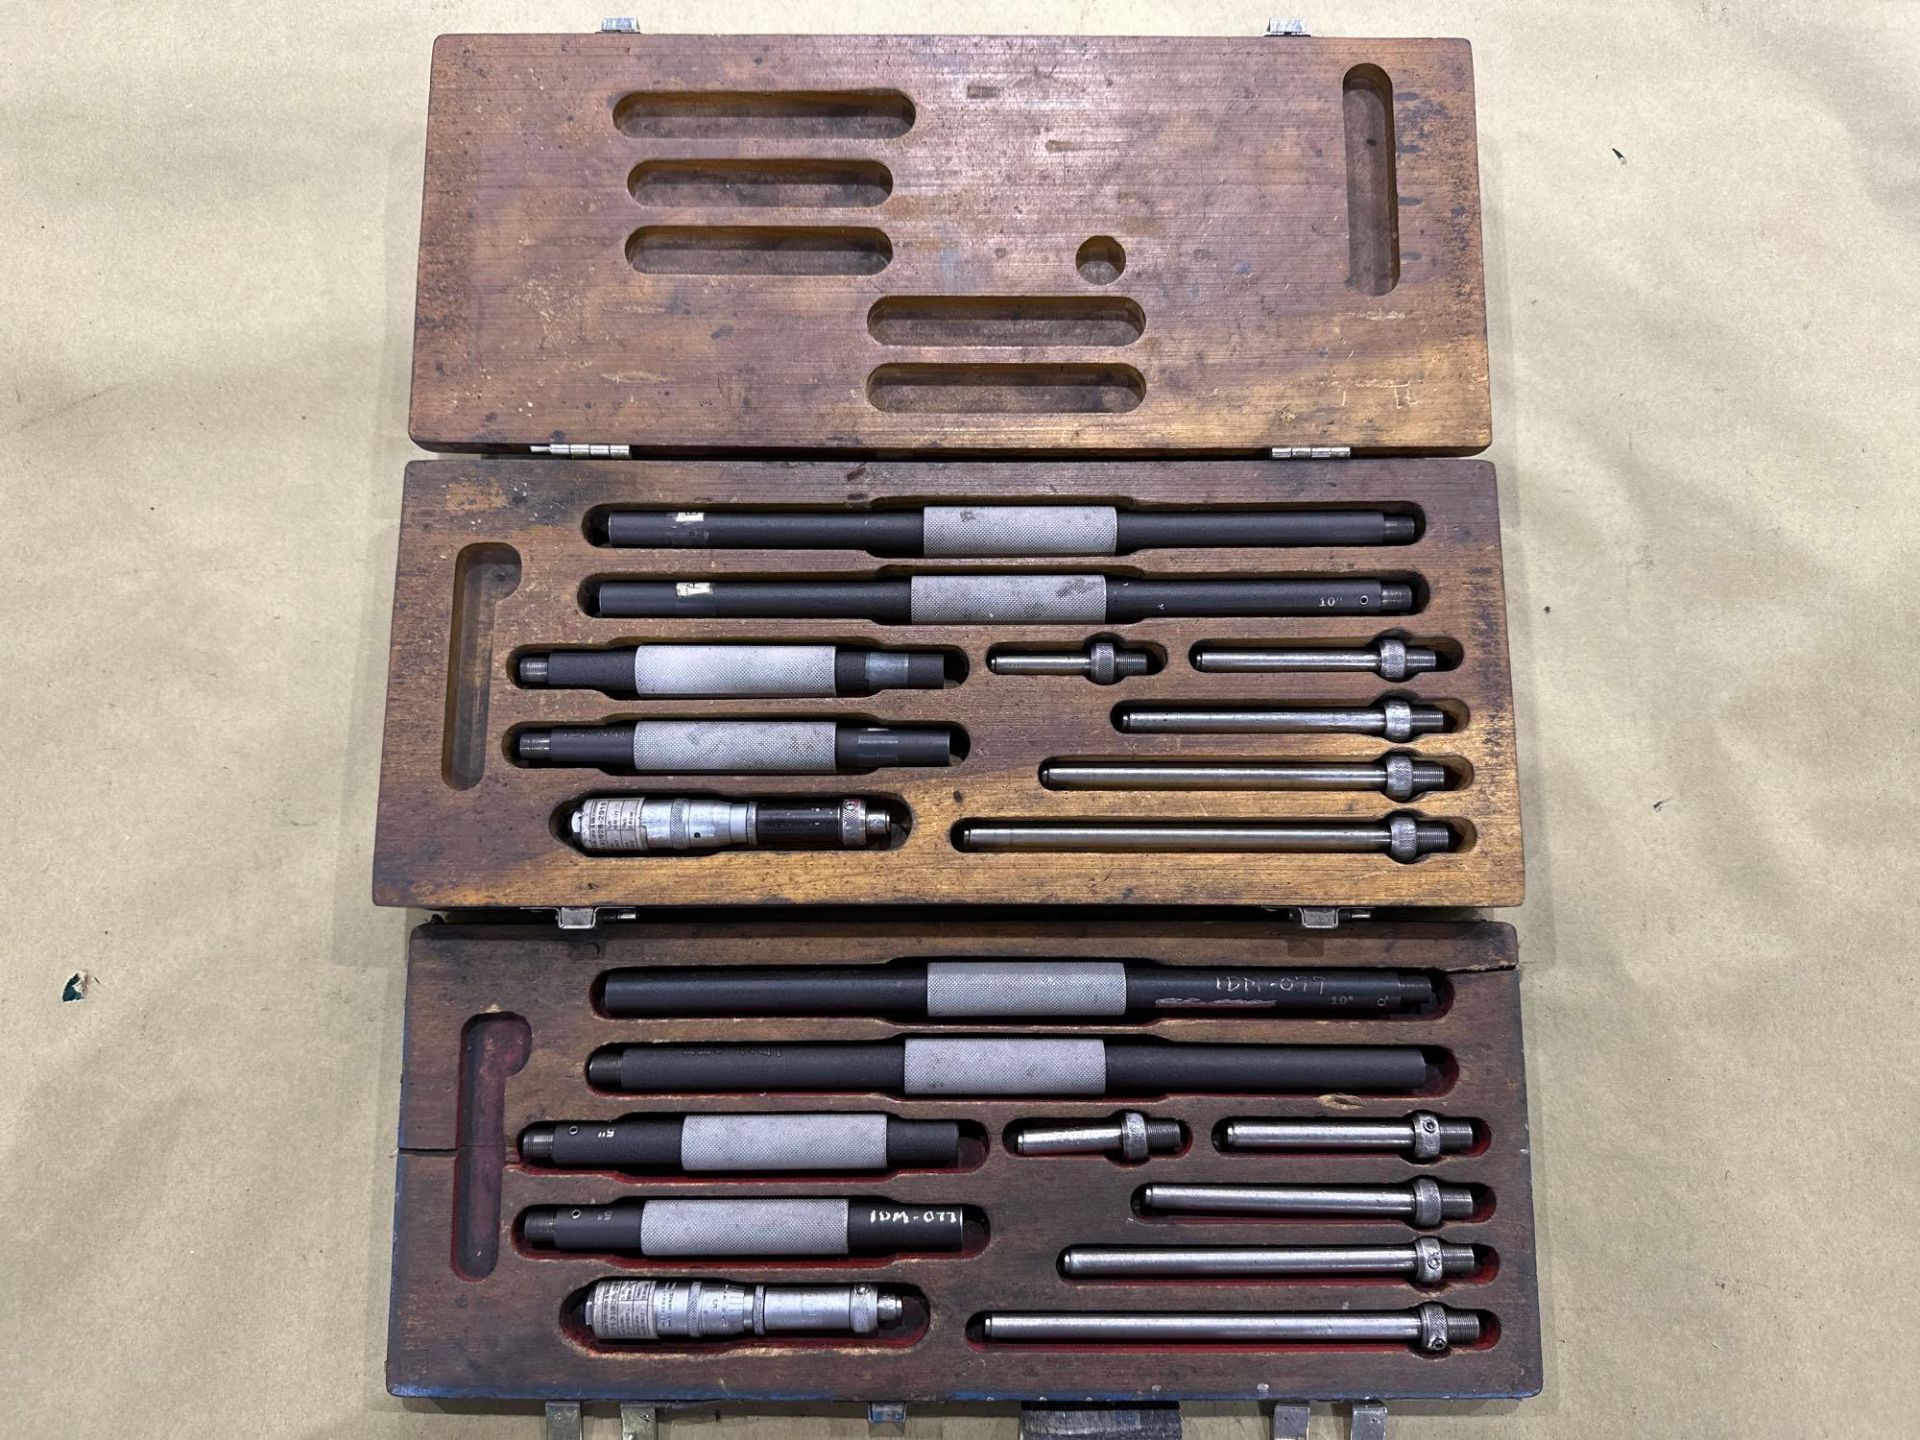 Lot of 3 Scherr-Tumico Inside Tube Micrometer Sets in wood case. See Photo. - Image 4 of 9